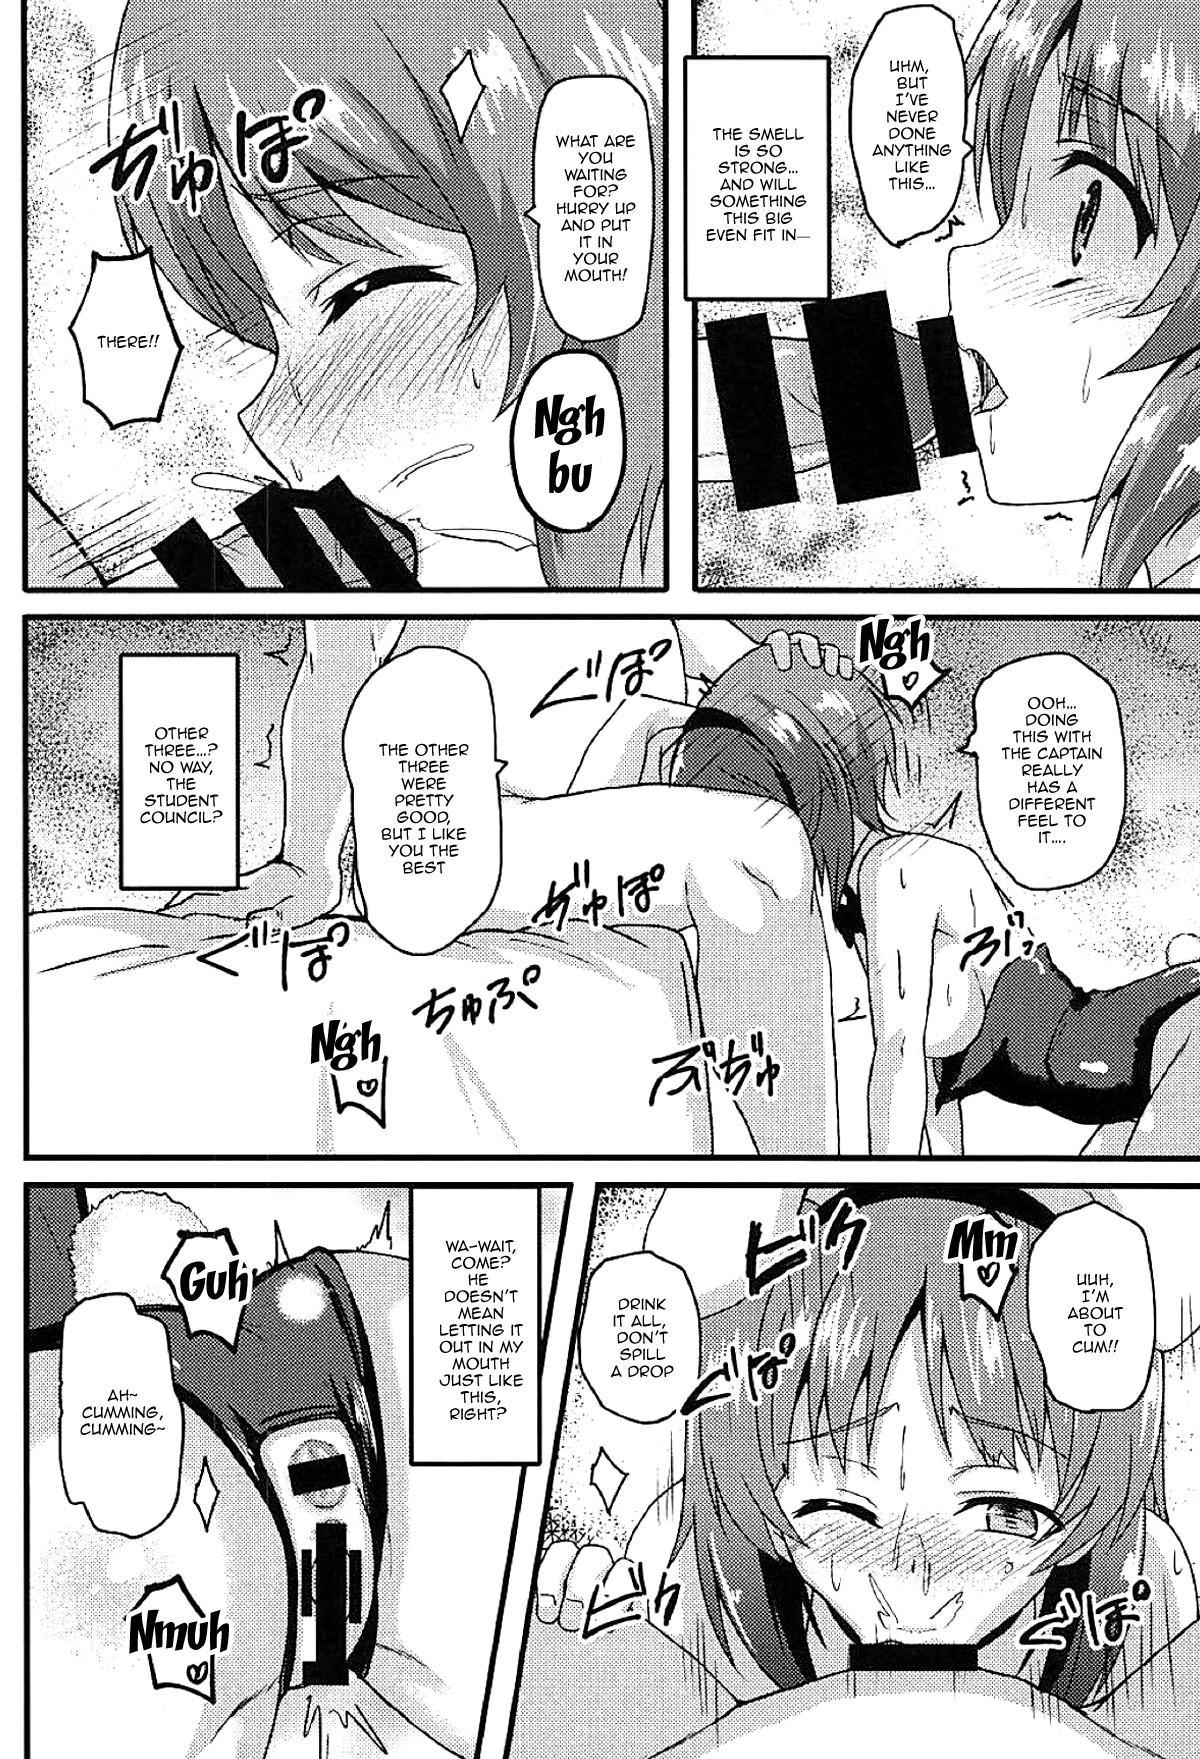 Vip Mihosya Shiyou!! | Let's Do It Mihosya!! - Girls und panzer Roleplay - Page 9